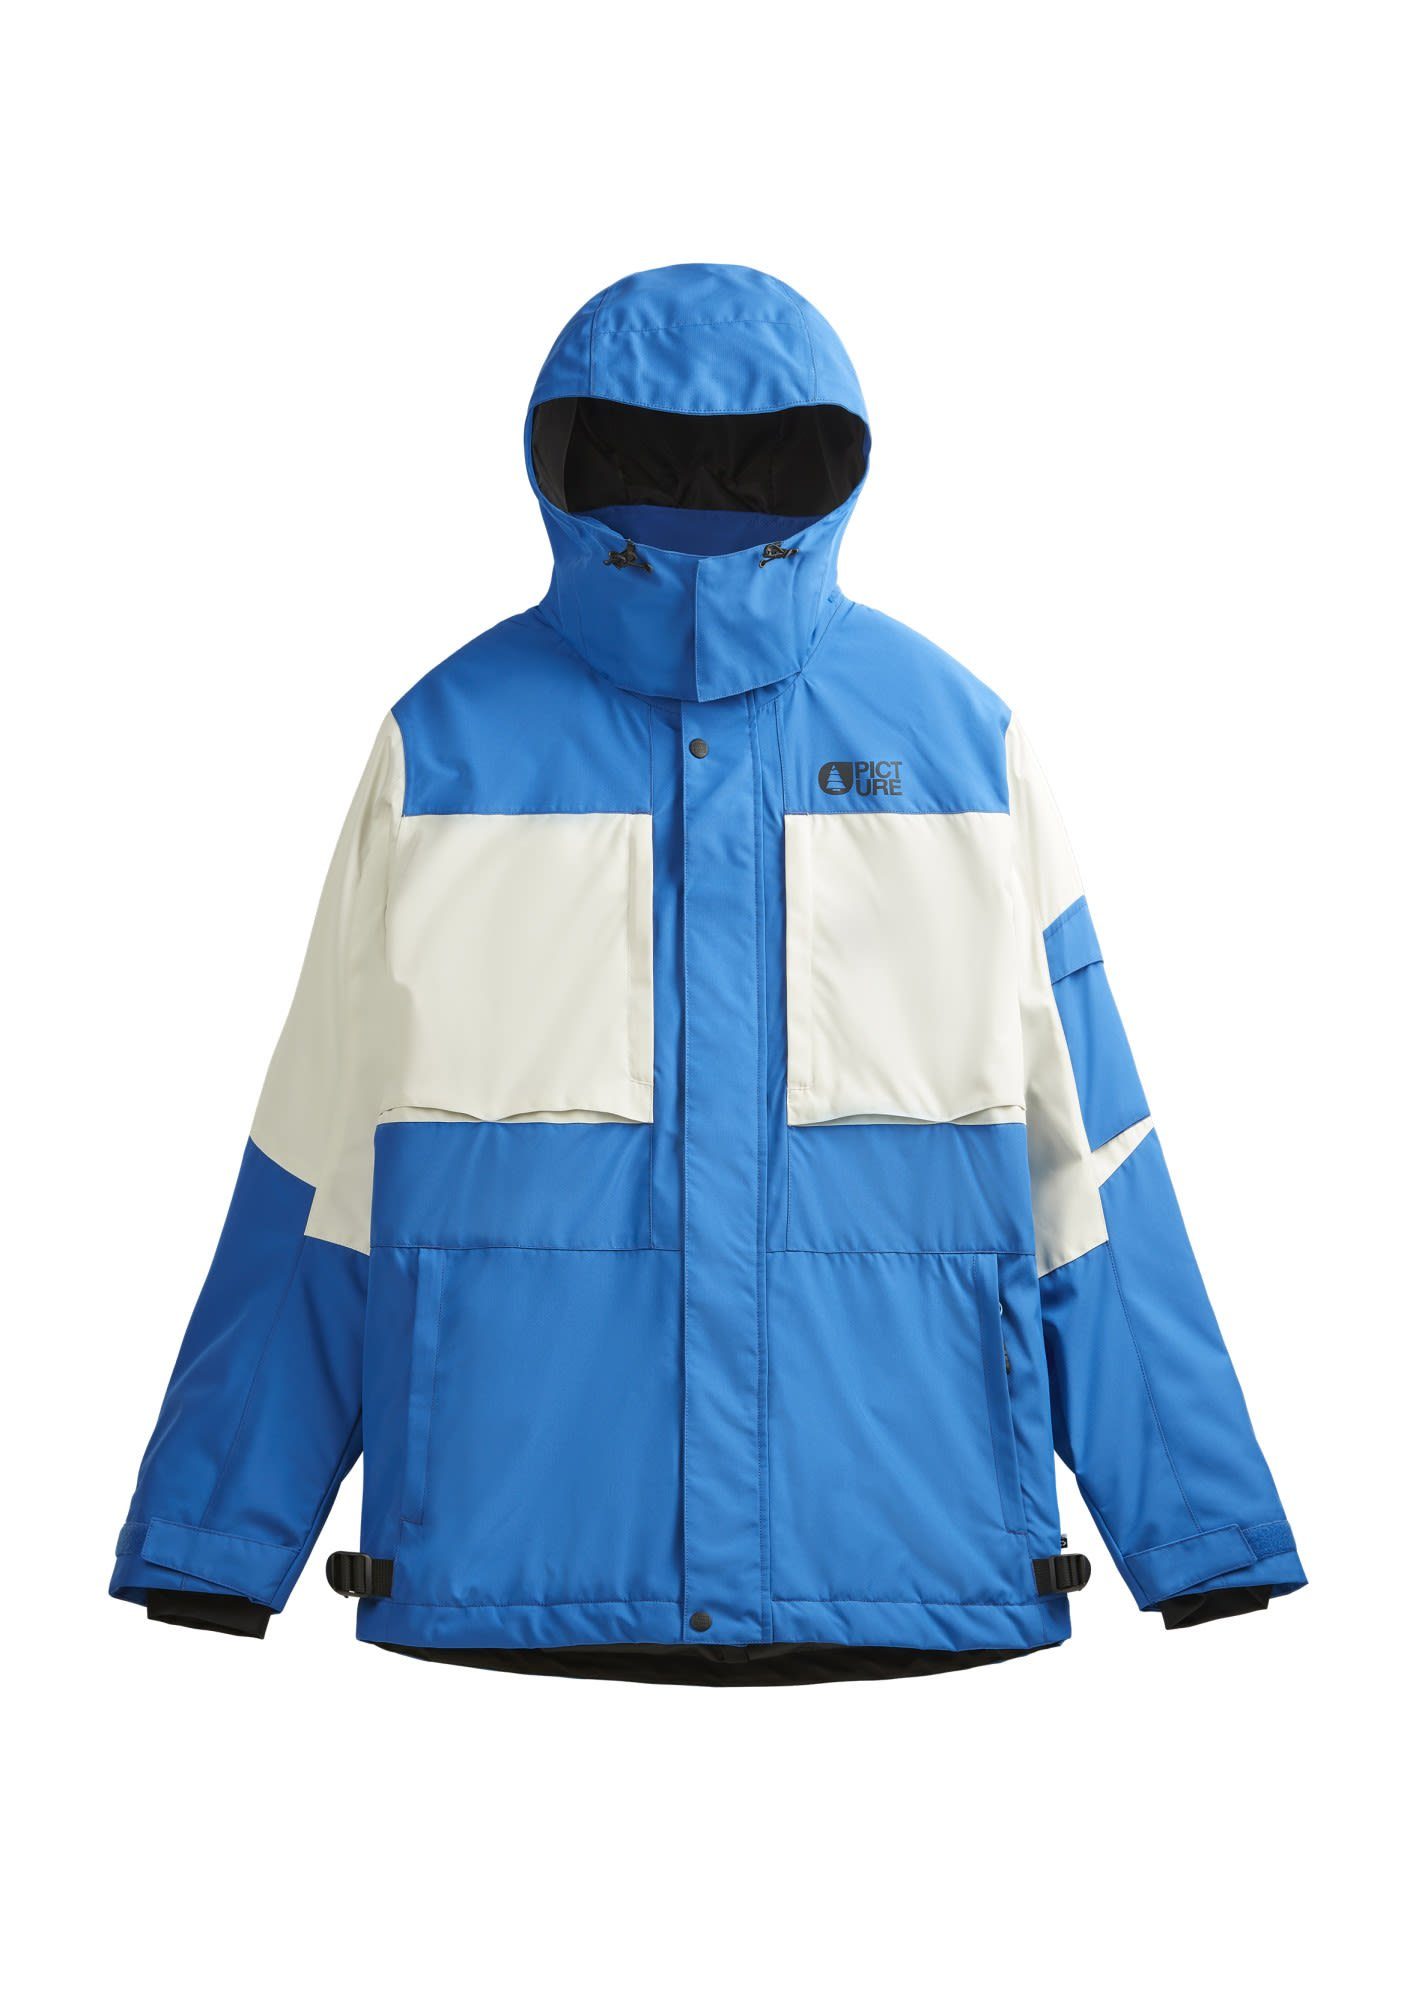 Blue Picture Payma Jacket & Winterjacke Ski- M Picture Picture Herren